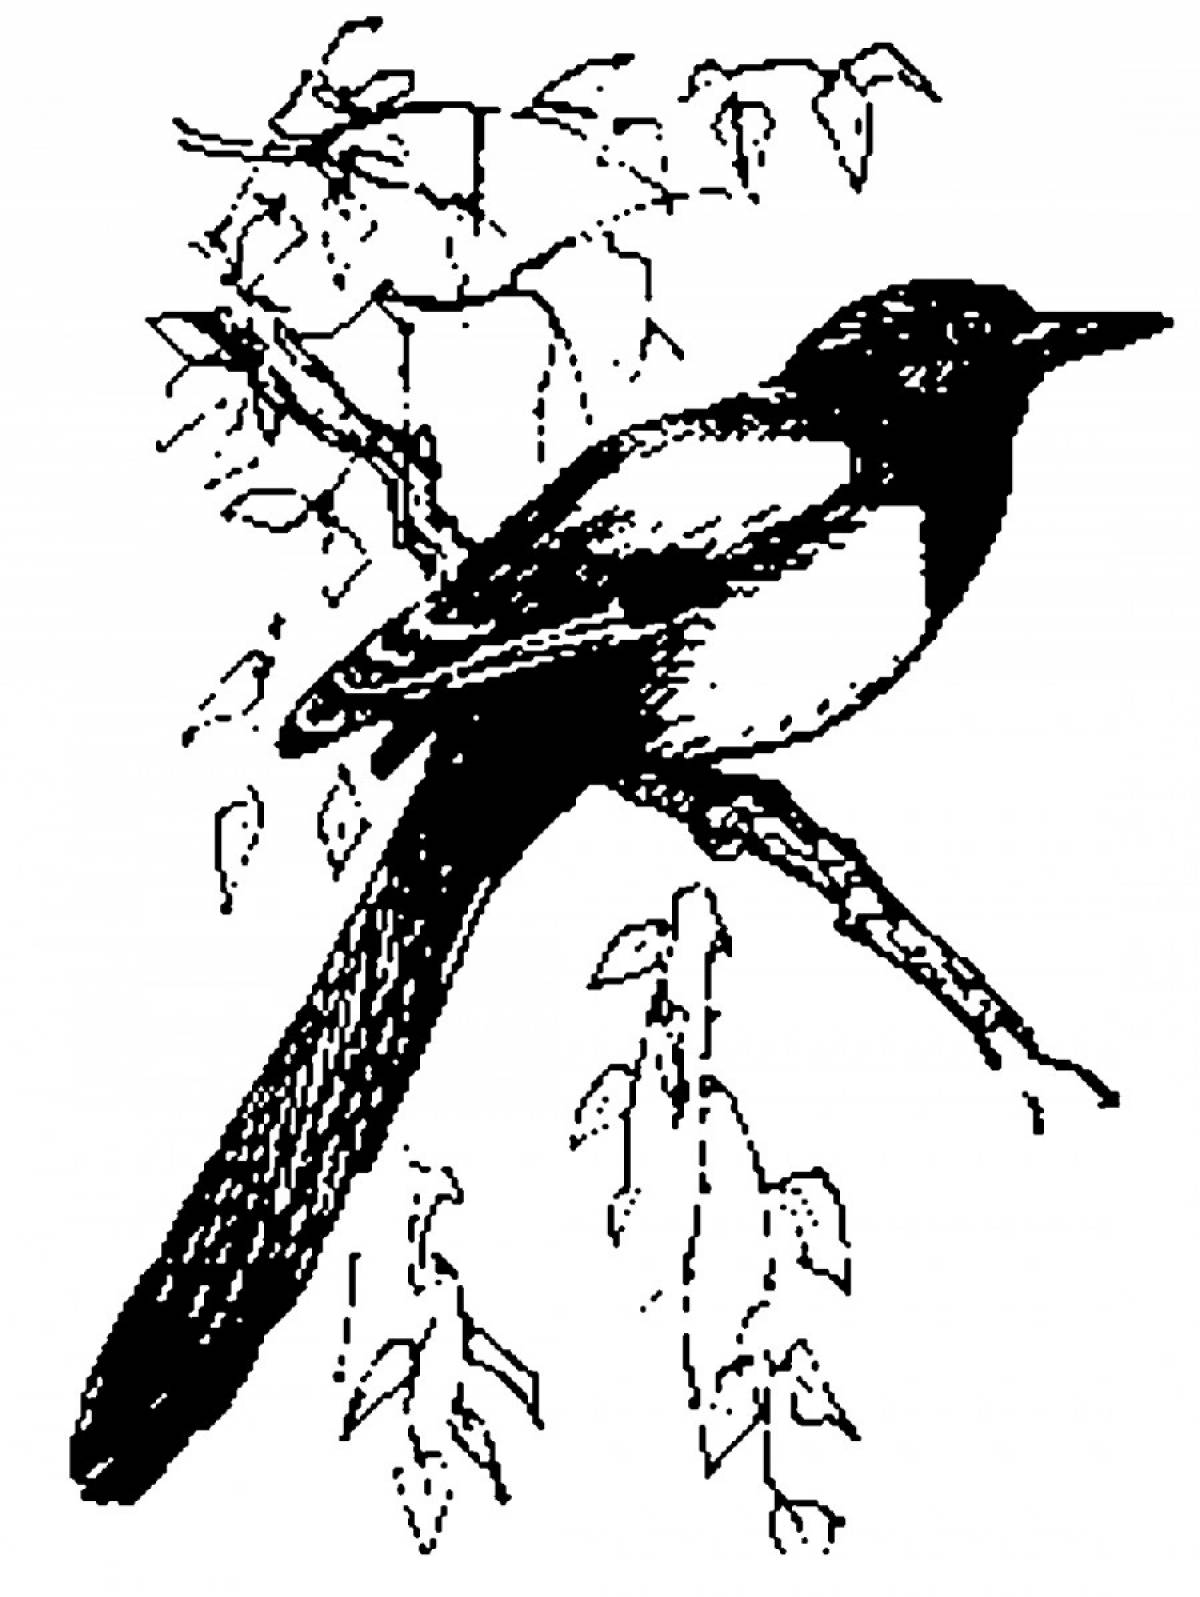 Magpie on a tree branch